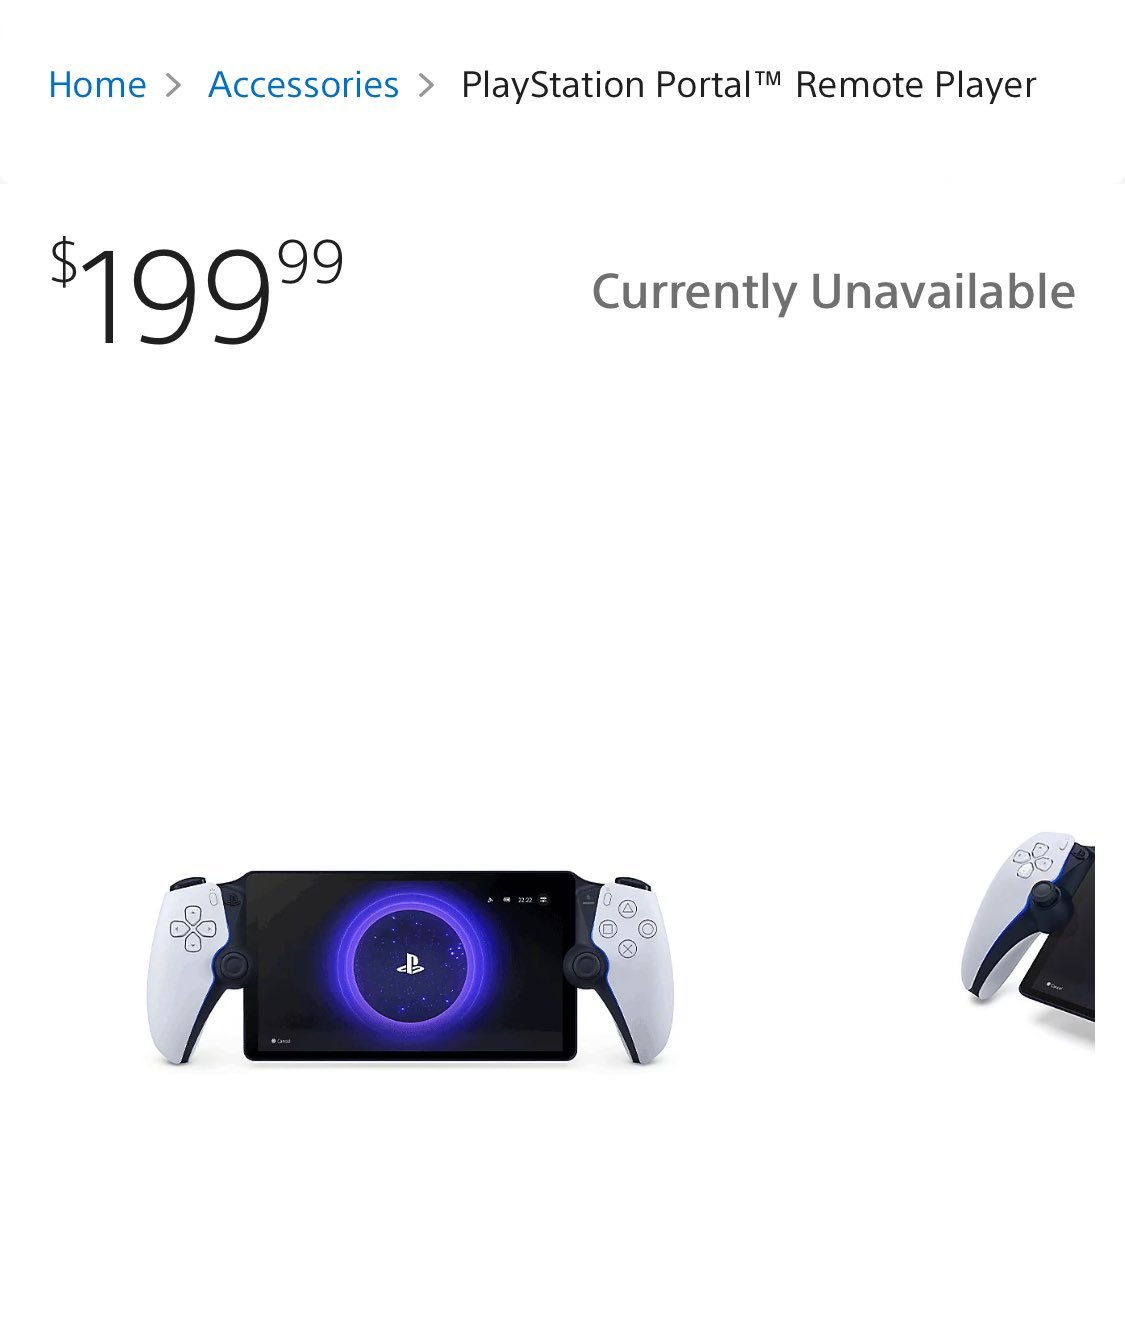 Where to Pre-Order PlayStation Portal